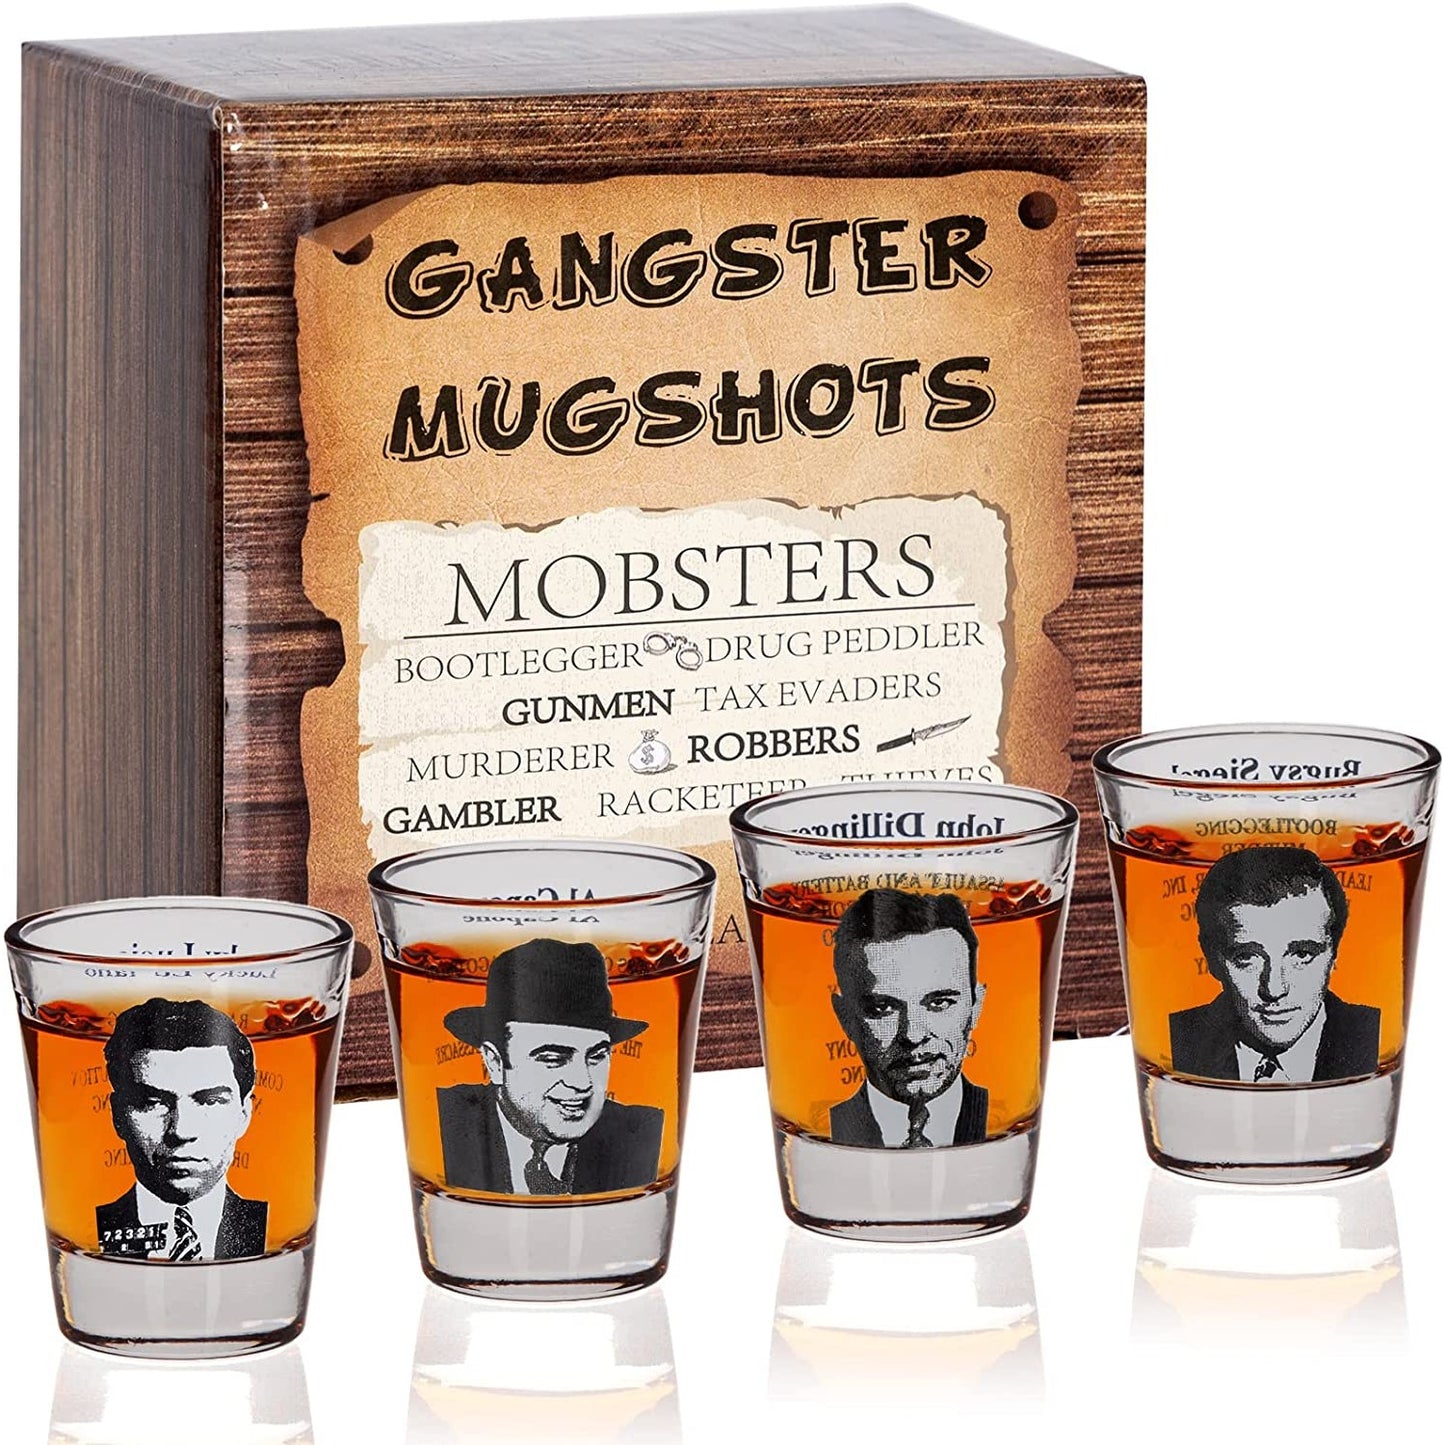 Set of iconic gangster-themed shot glasses featuring images and designs inspired by classic gangster culture.